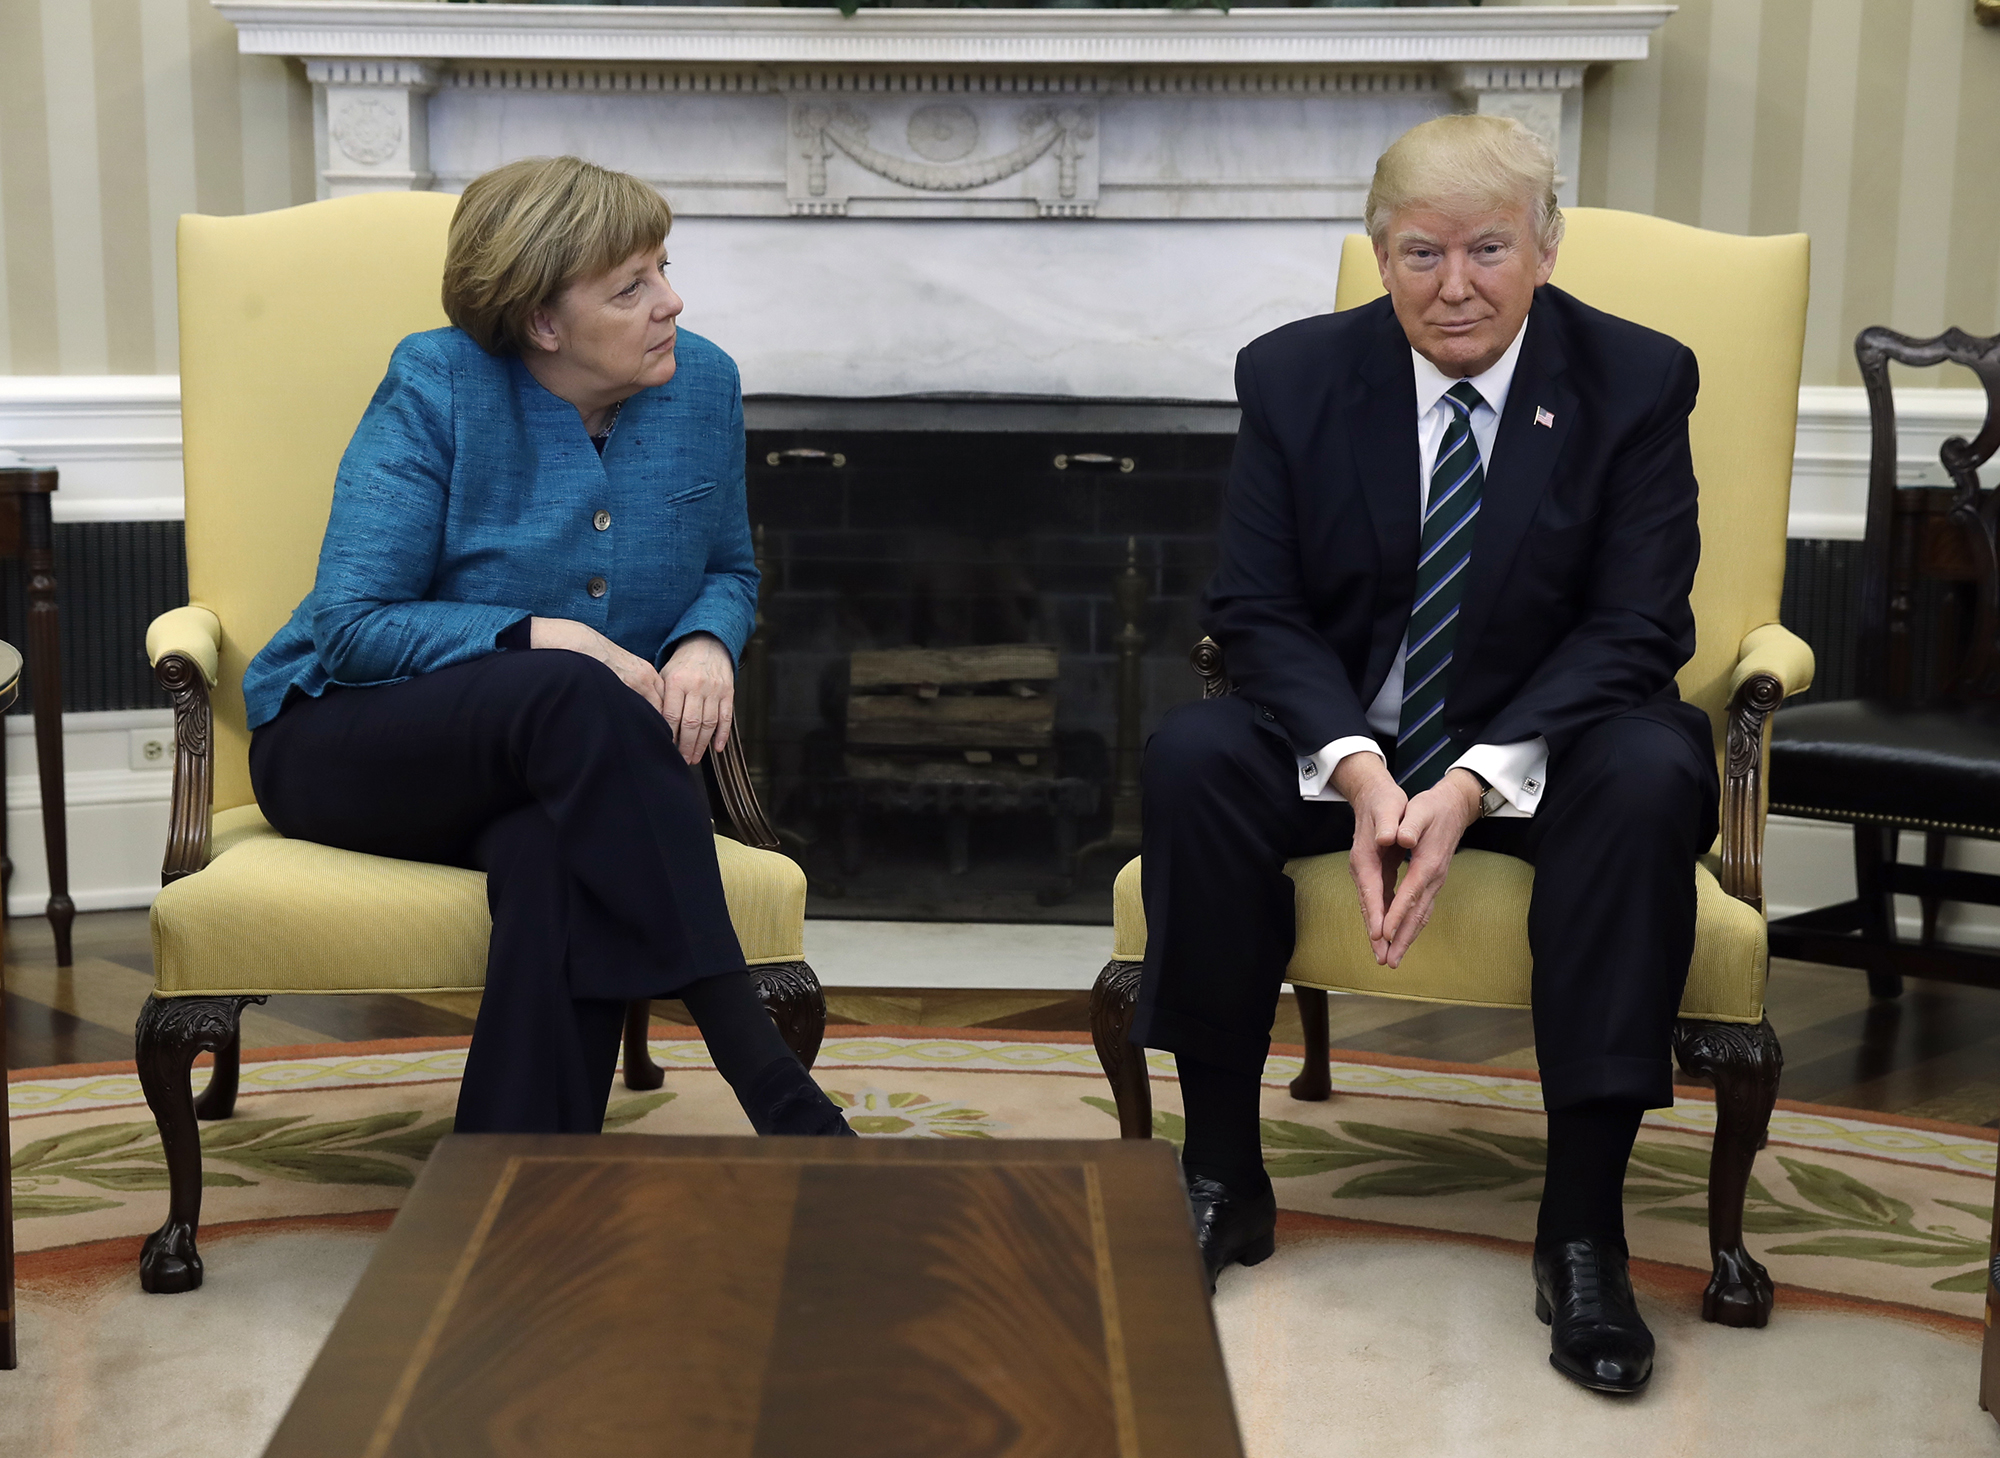 President Donald Trump meets with German Chancellor Angela Merkel in the Oval Office of the White House in Washington, Friday, March 17, 2017. (AP Photo/Evan Vucci)